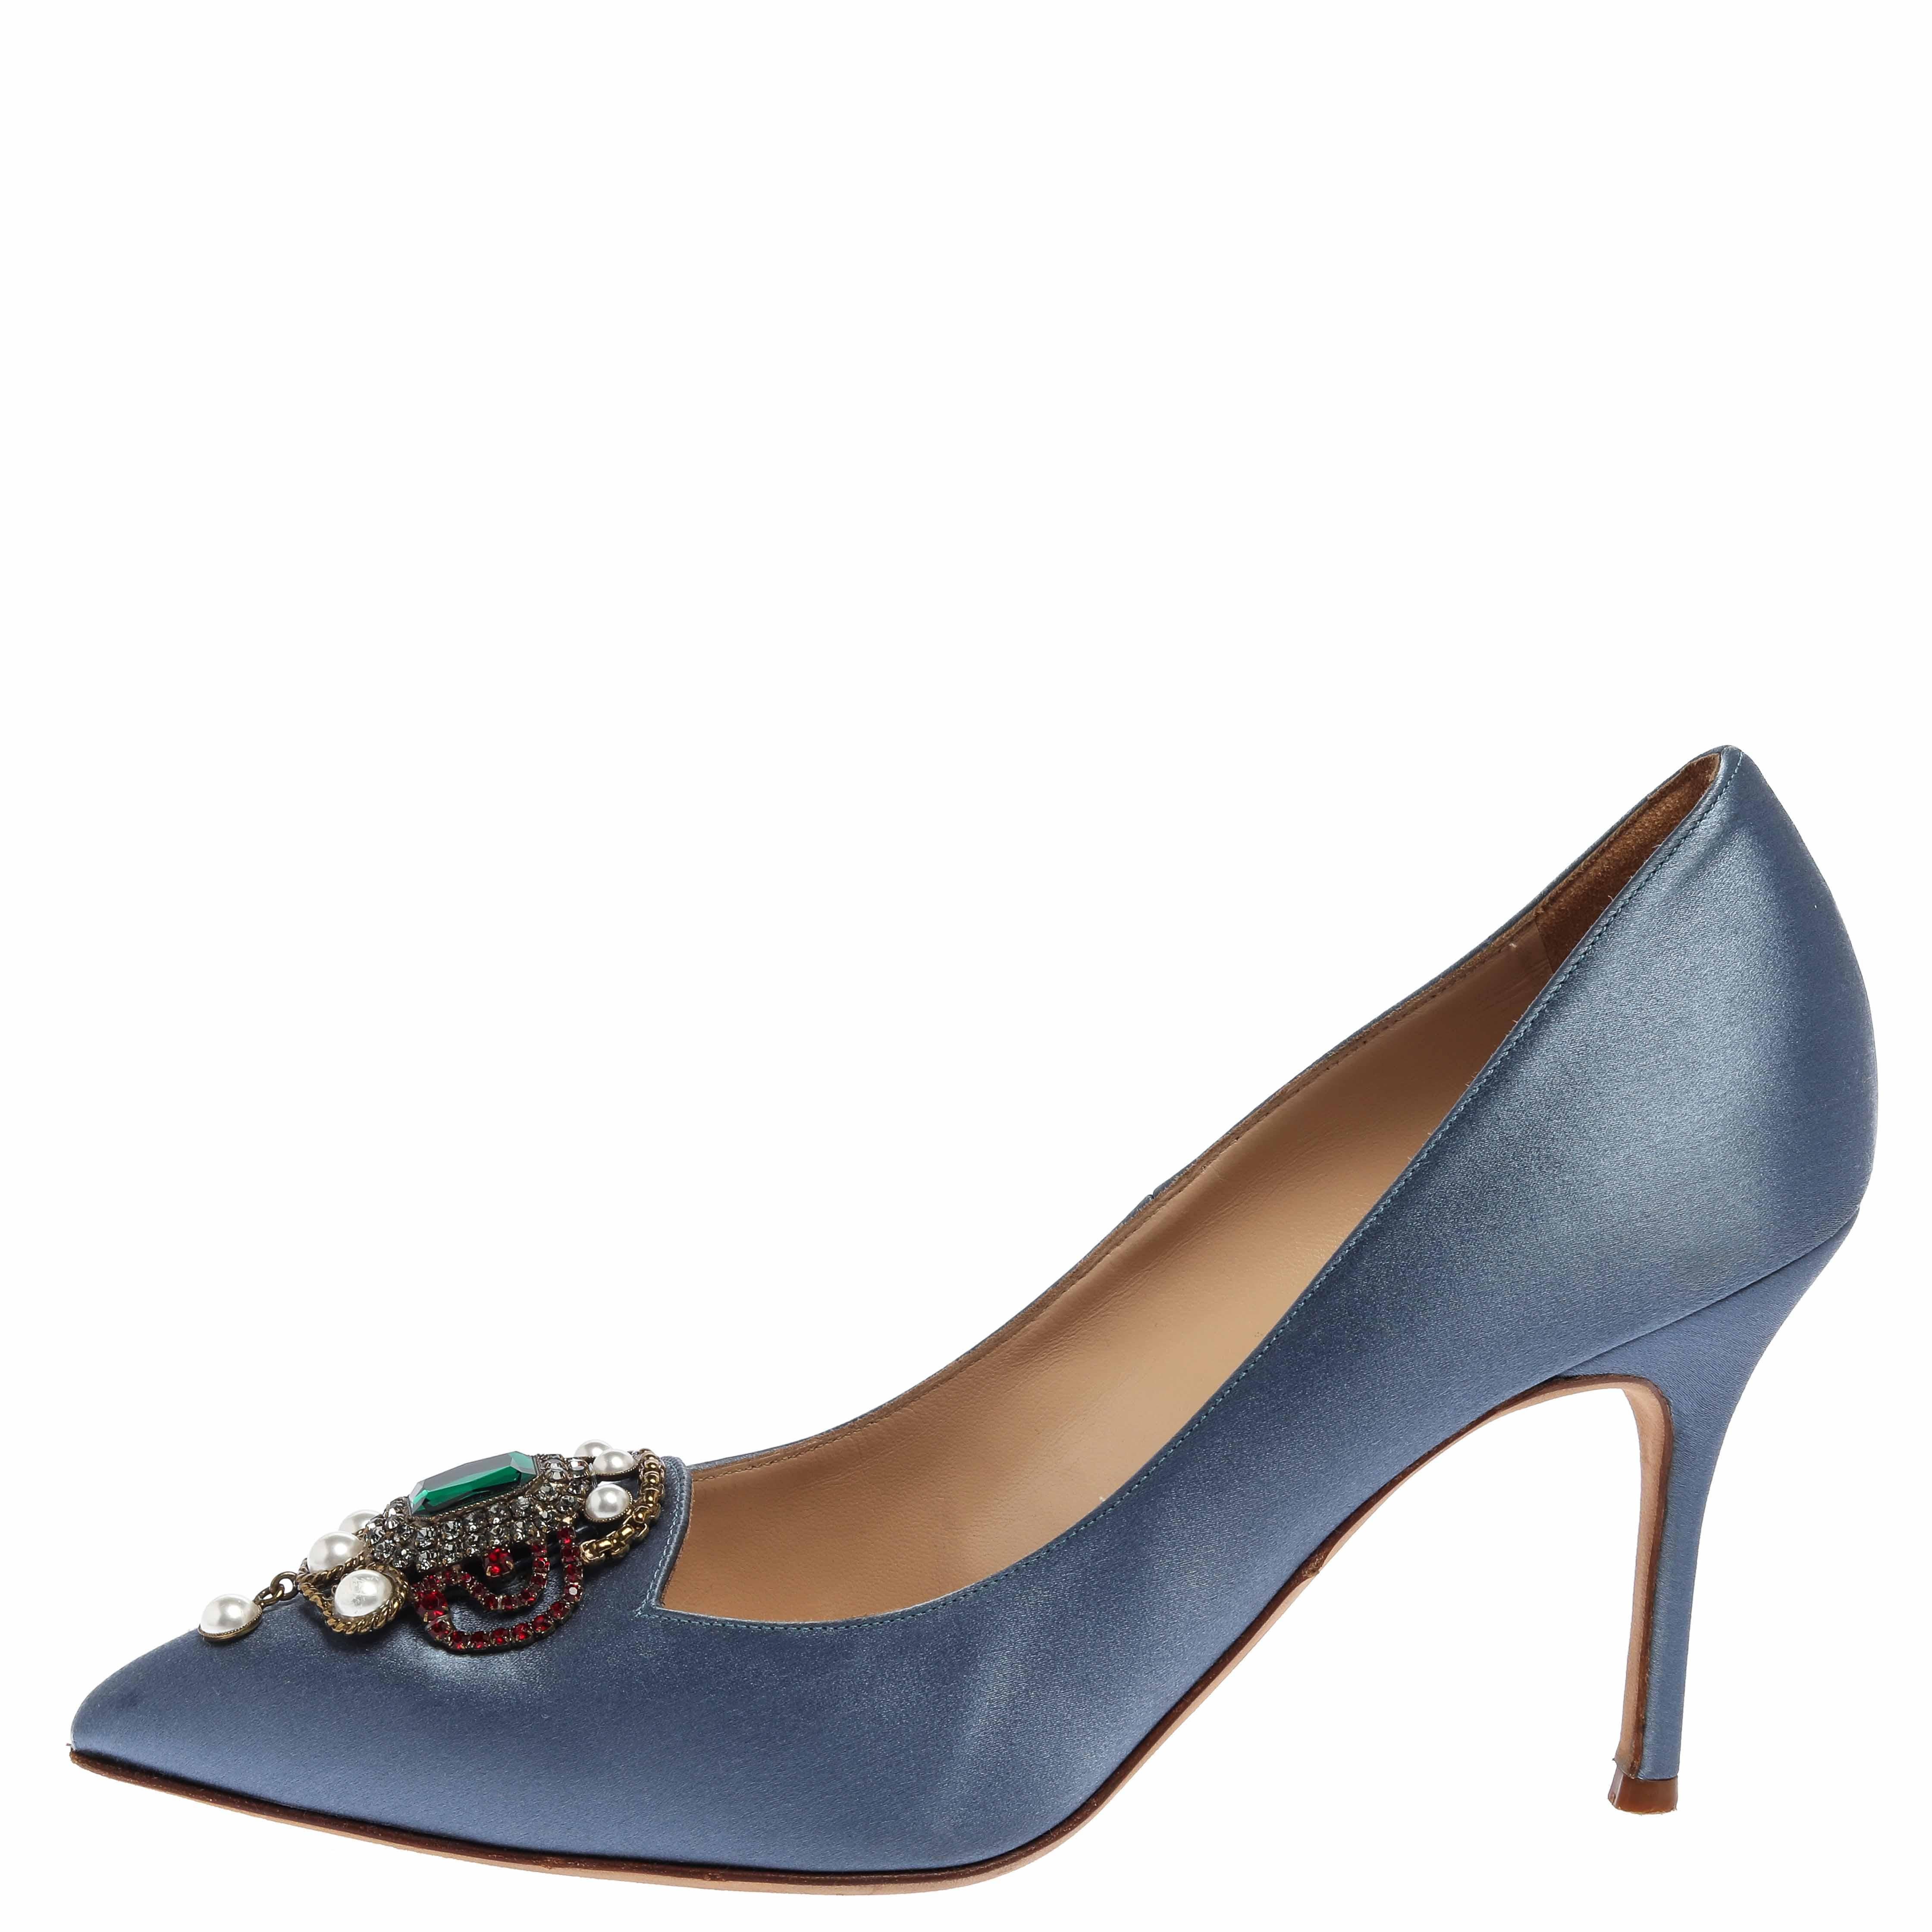 These blue satin heels by Manolo Blahnik are the perfect statement-making evening heels. Flaunting contemporary fashion with pointed toes which are enhanced with a crystal embellished brooch at the vamps, leather lining, comfortable insoles, and 9